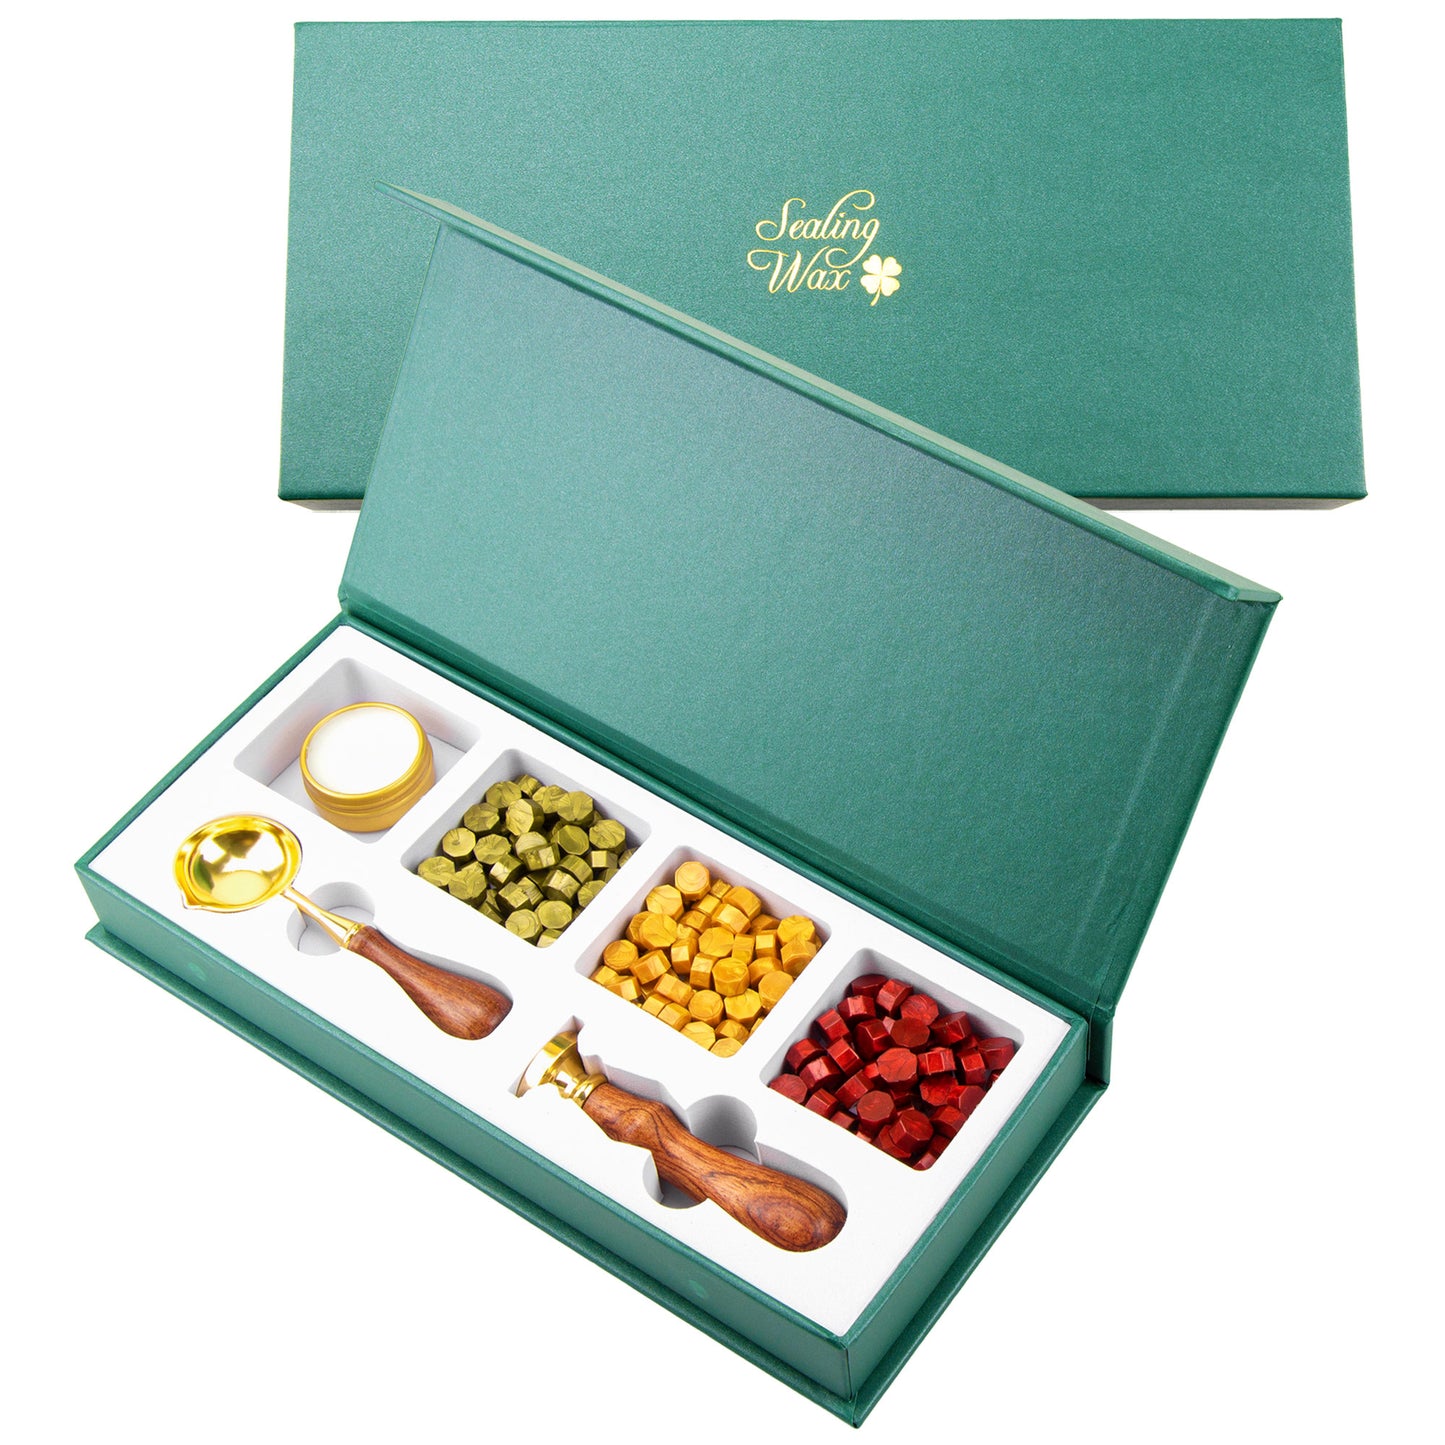 Wax Seal Stamp Kit - Wax Seal Kit With 165 pcs Wax Seal Beads, Tree Of Life Wax Stamp, Wax Seal Spoon And Tea light Candle In A Gift Box